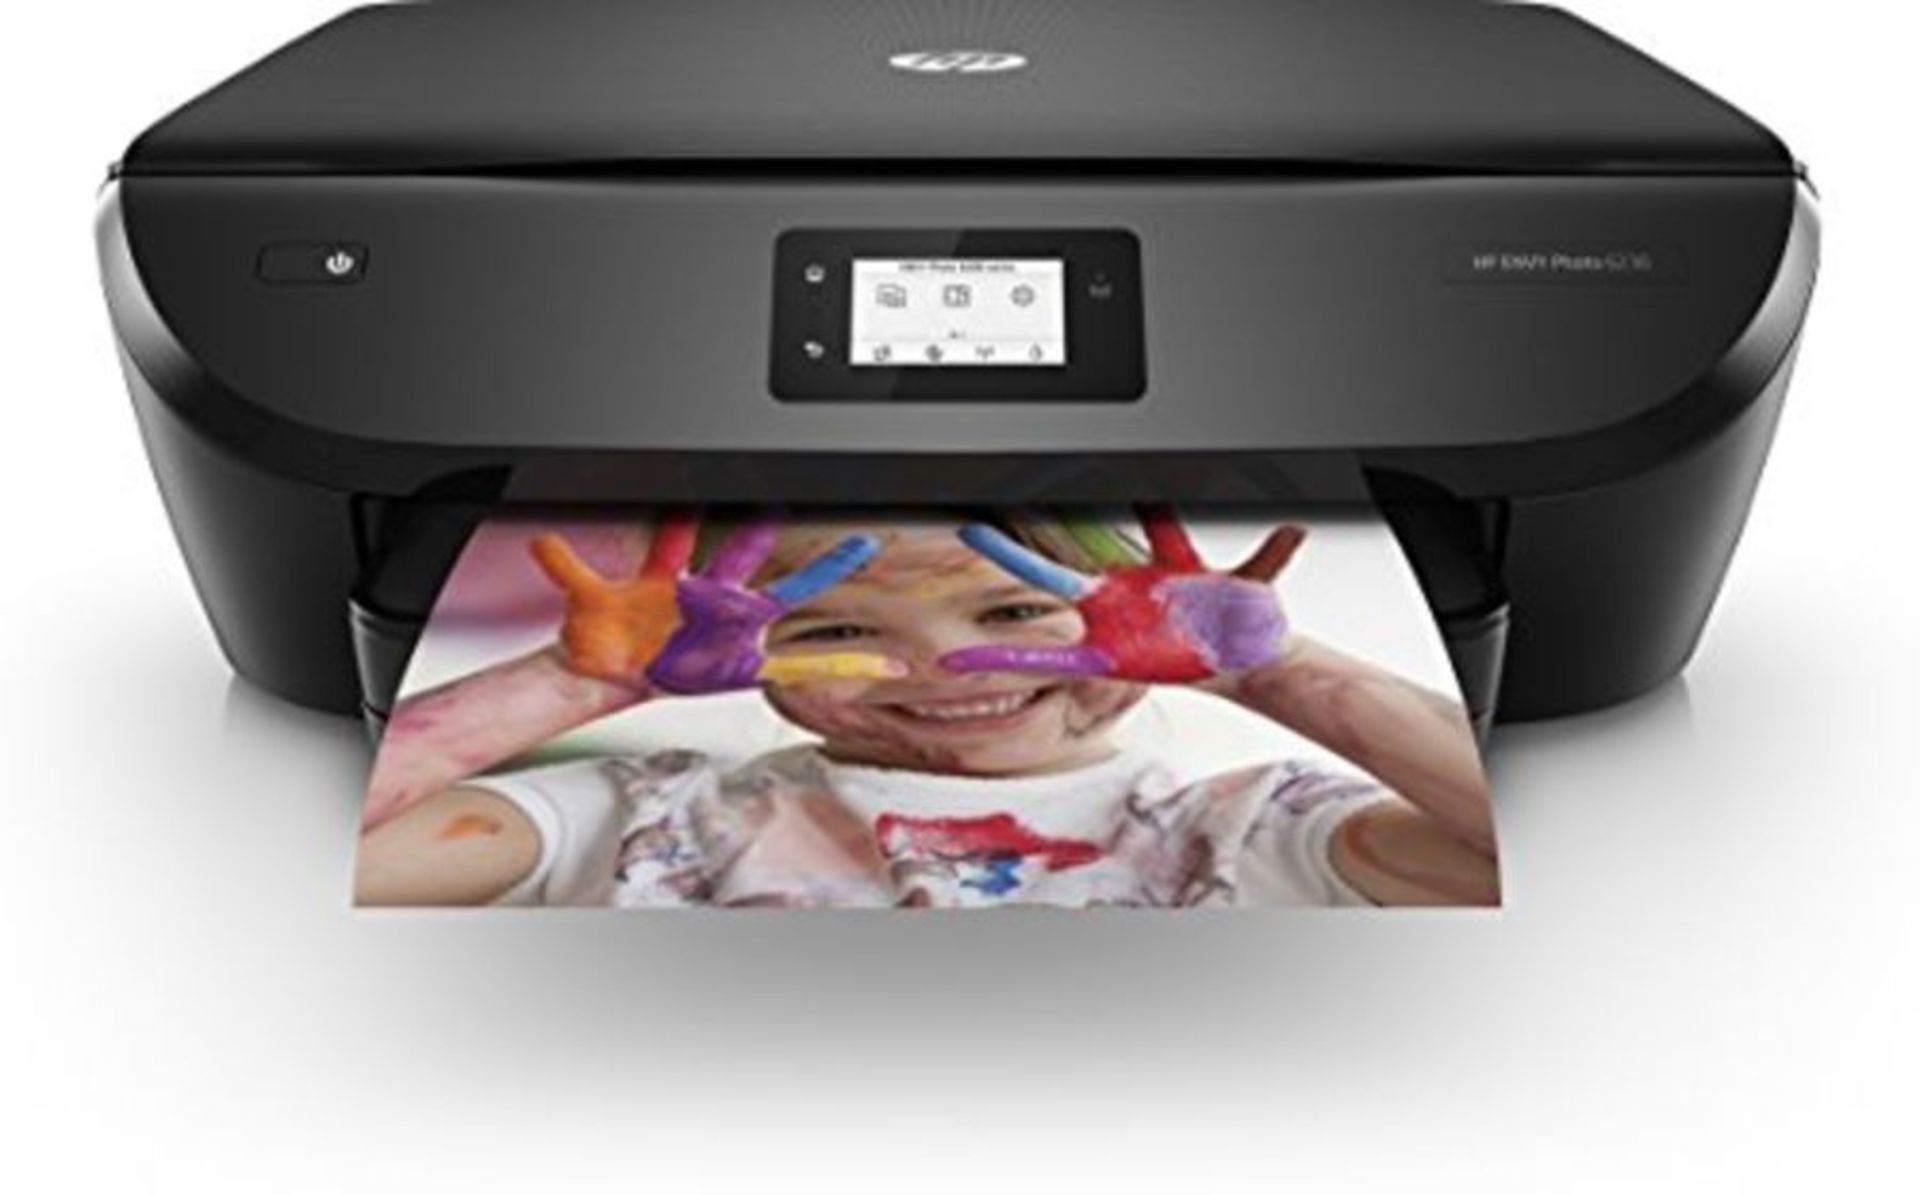 RRP £84.00 HP Envy Photo 6230 All-in-One Wi-Fi Photo Printer with 4 Months of Instant Ink Include